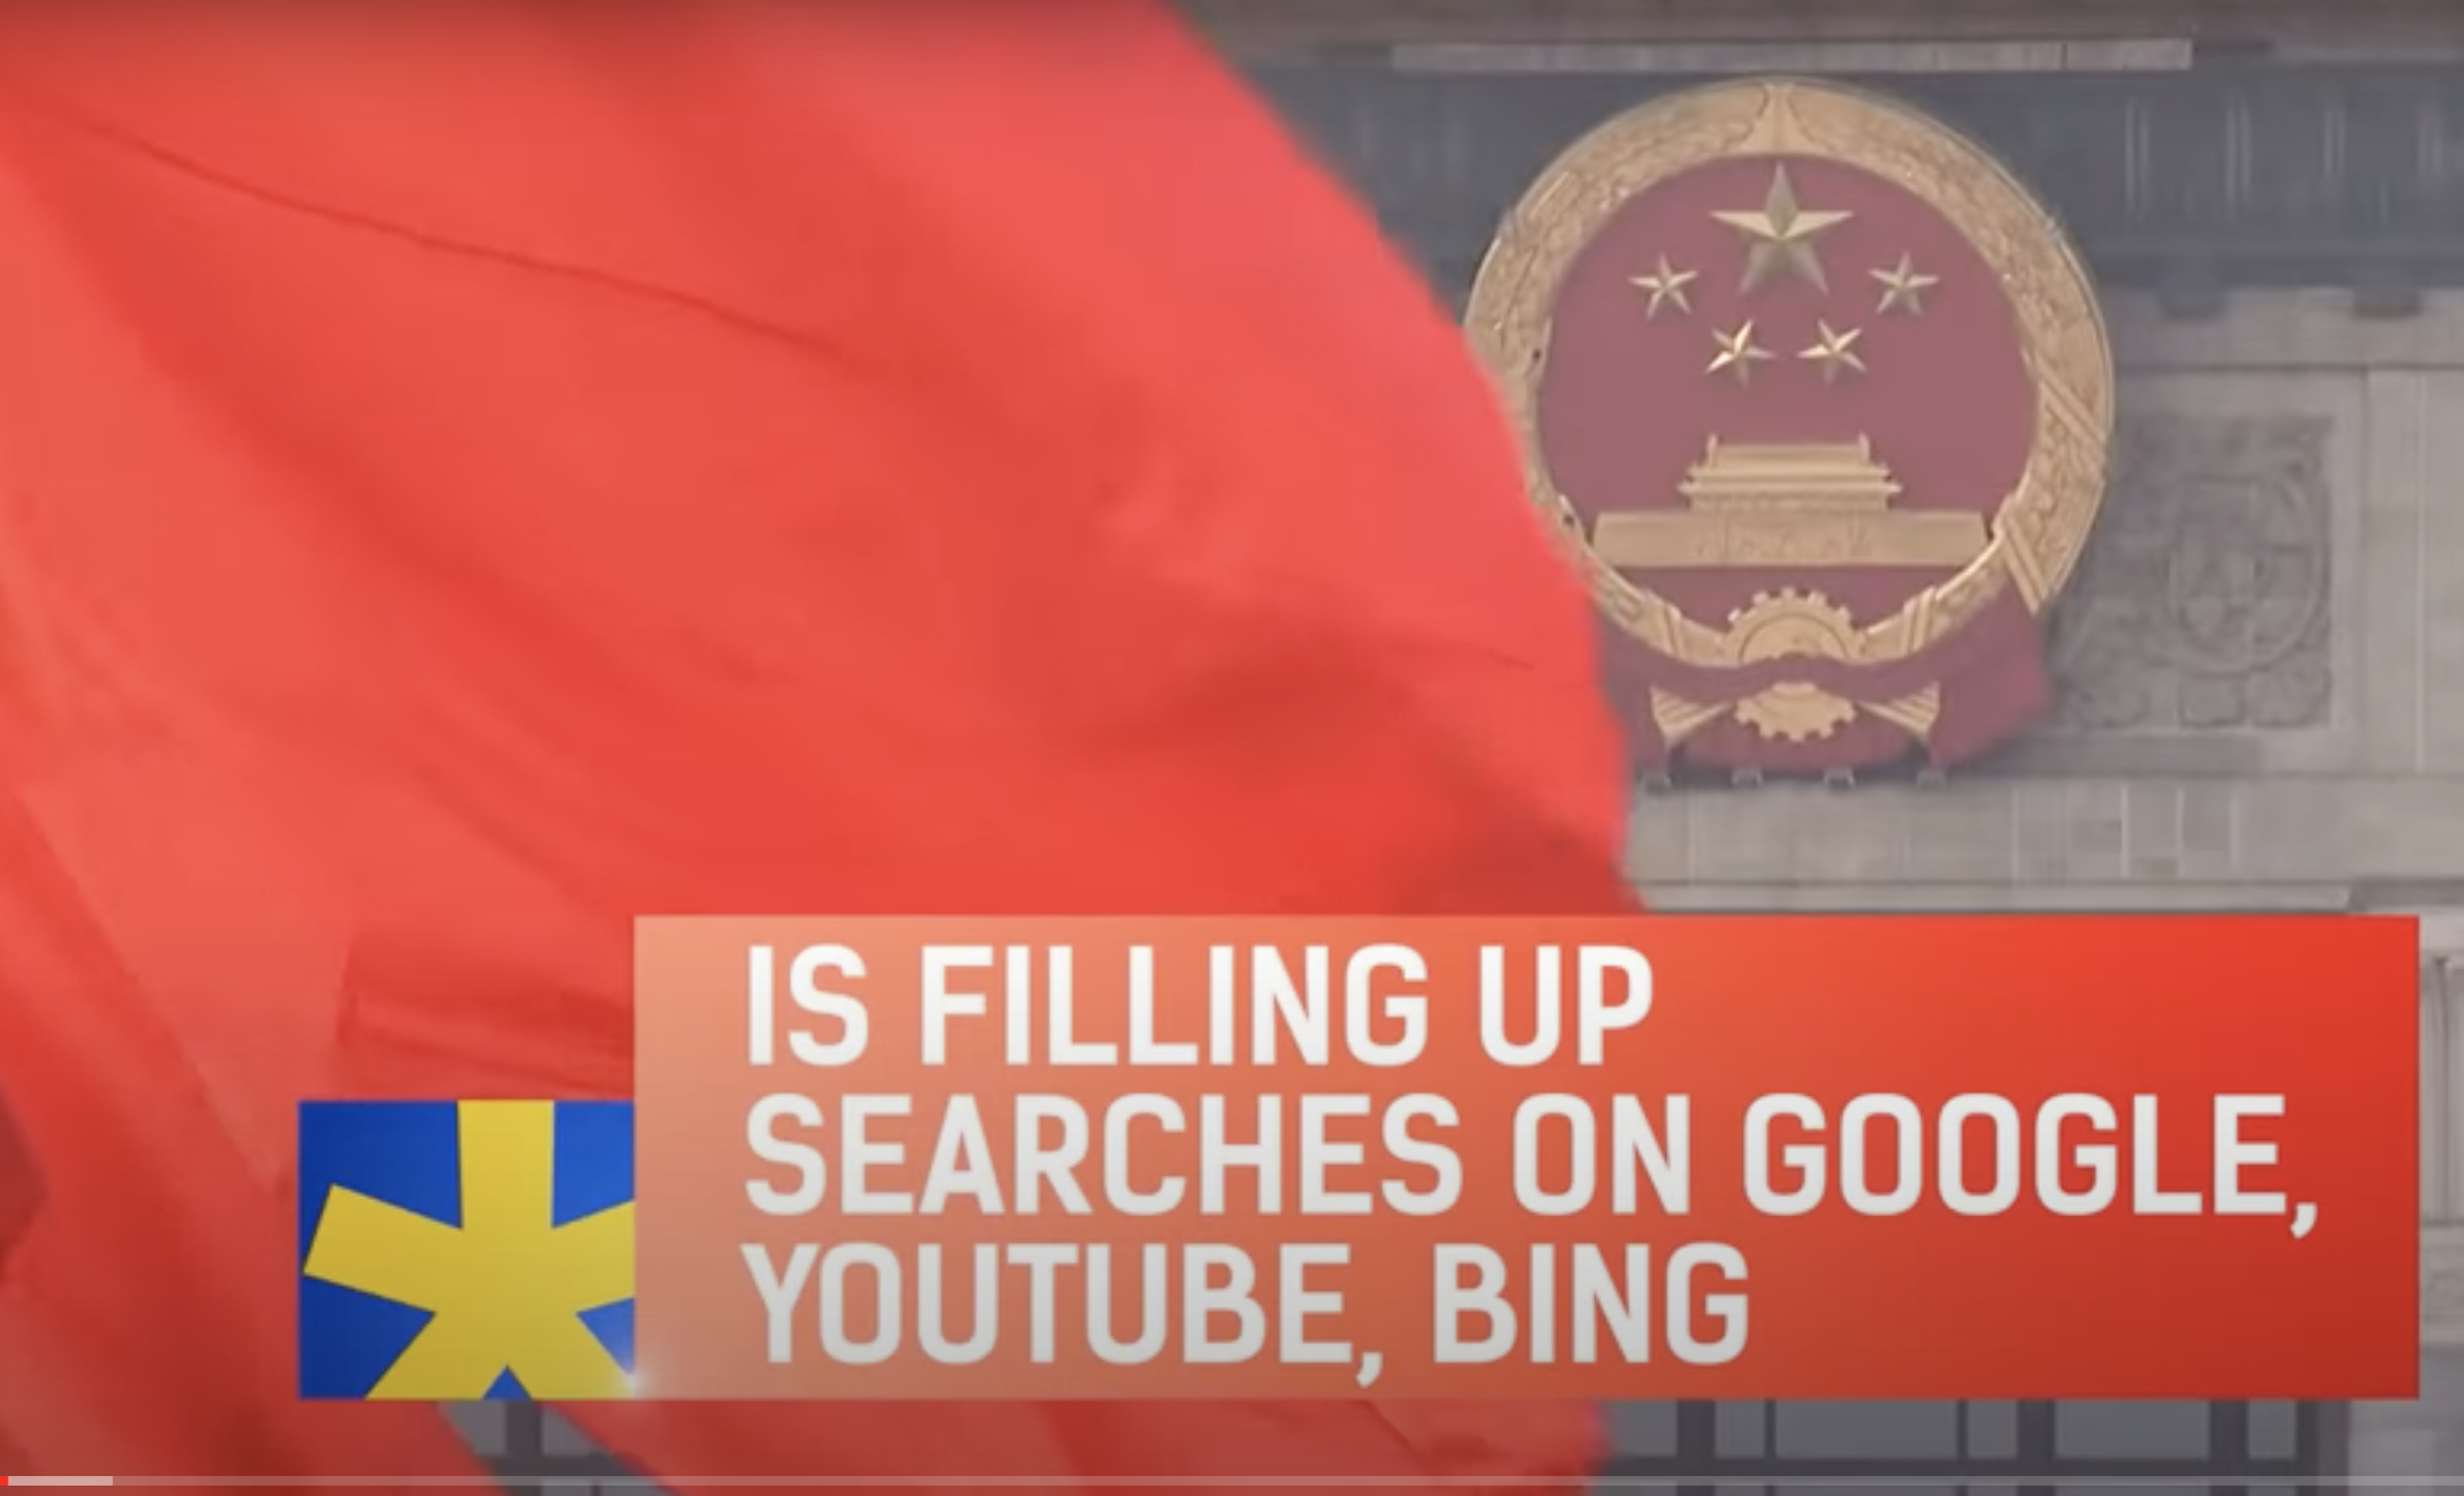 GET OFF THE COMMIE PLATFORMS! Google And YouTube Pushing China’s COMMUNIST Propaganda